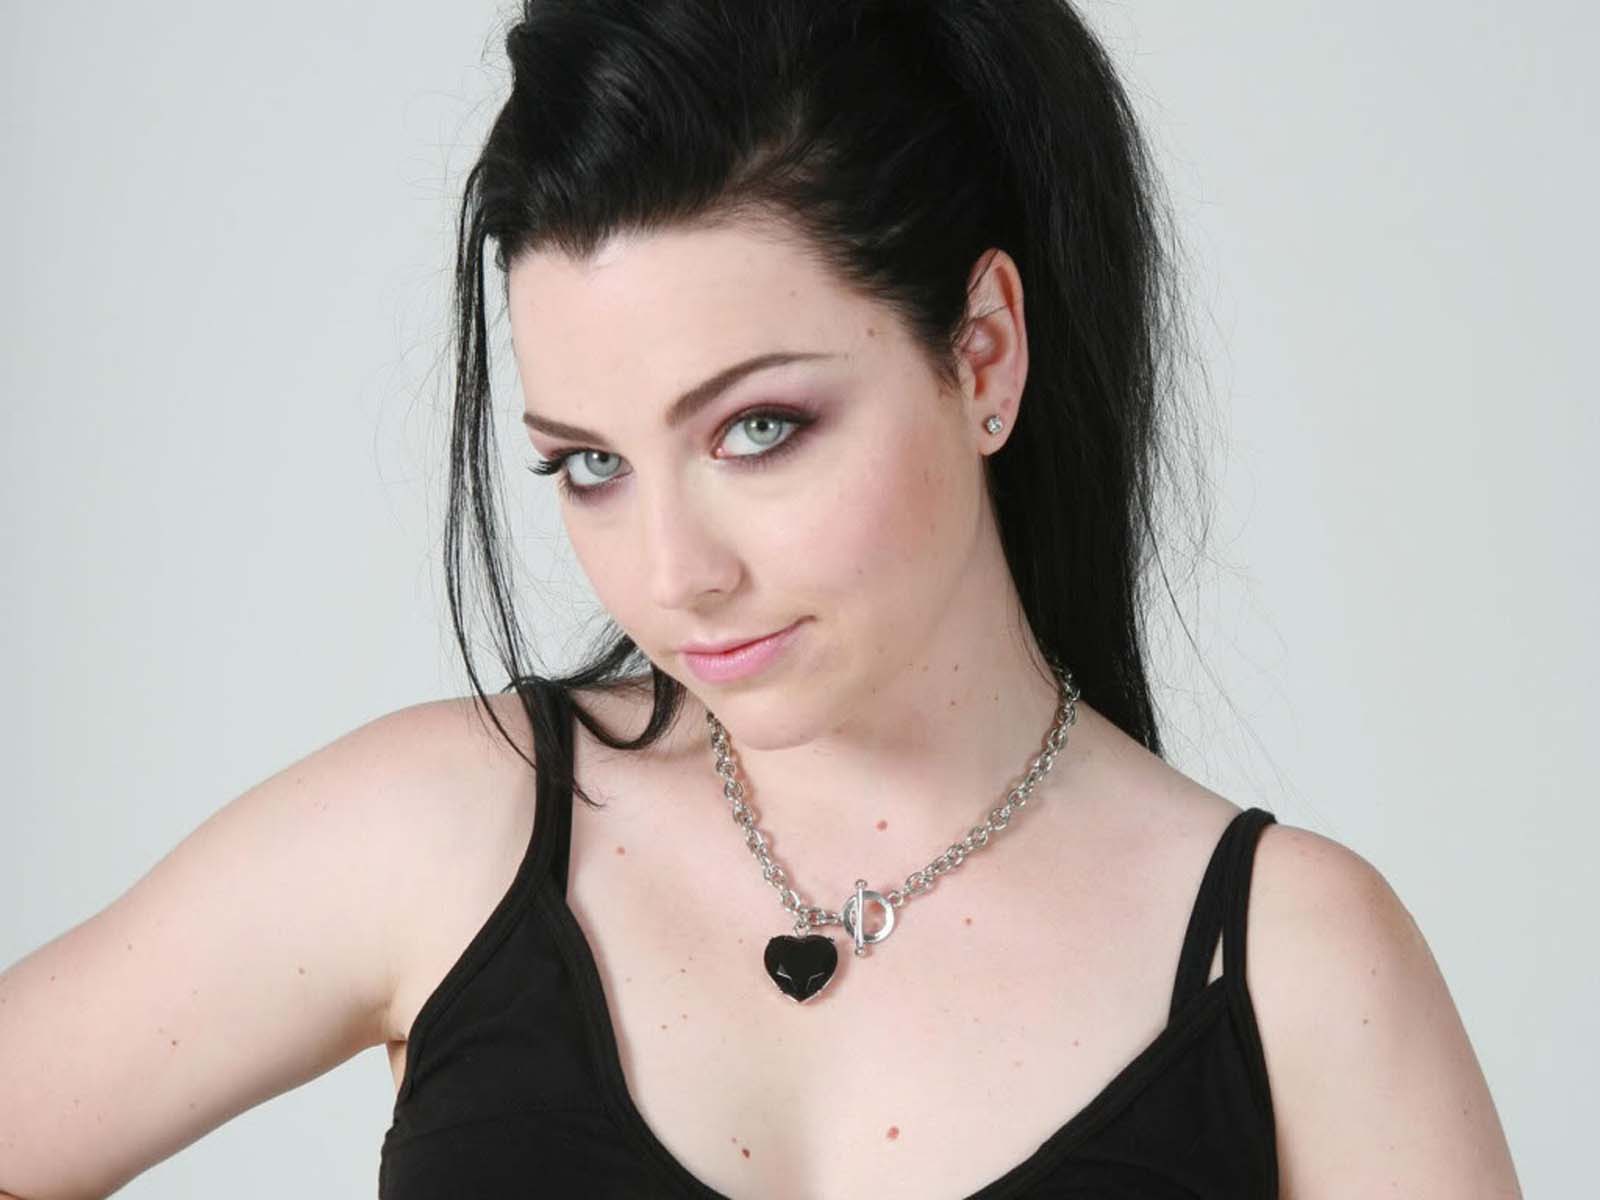 Amy Lee HD Wallpaper Pictures